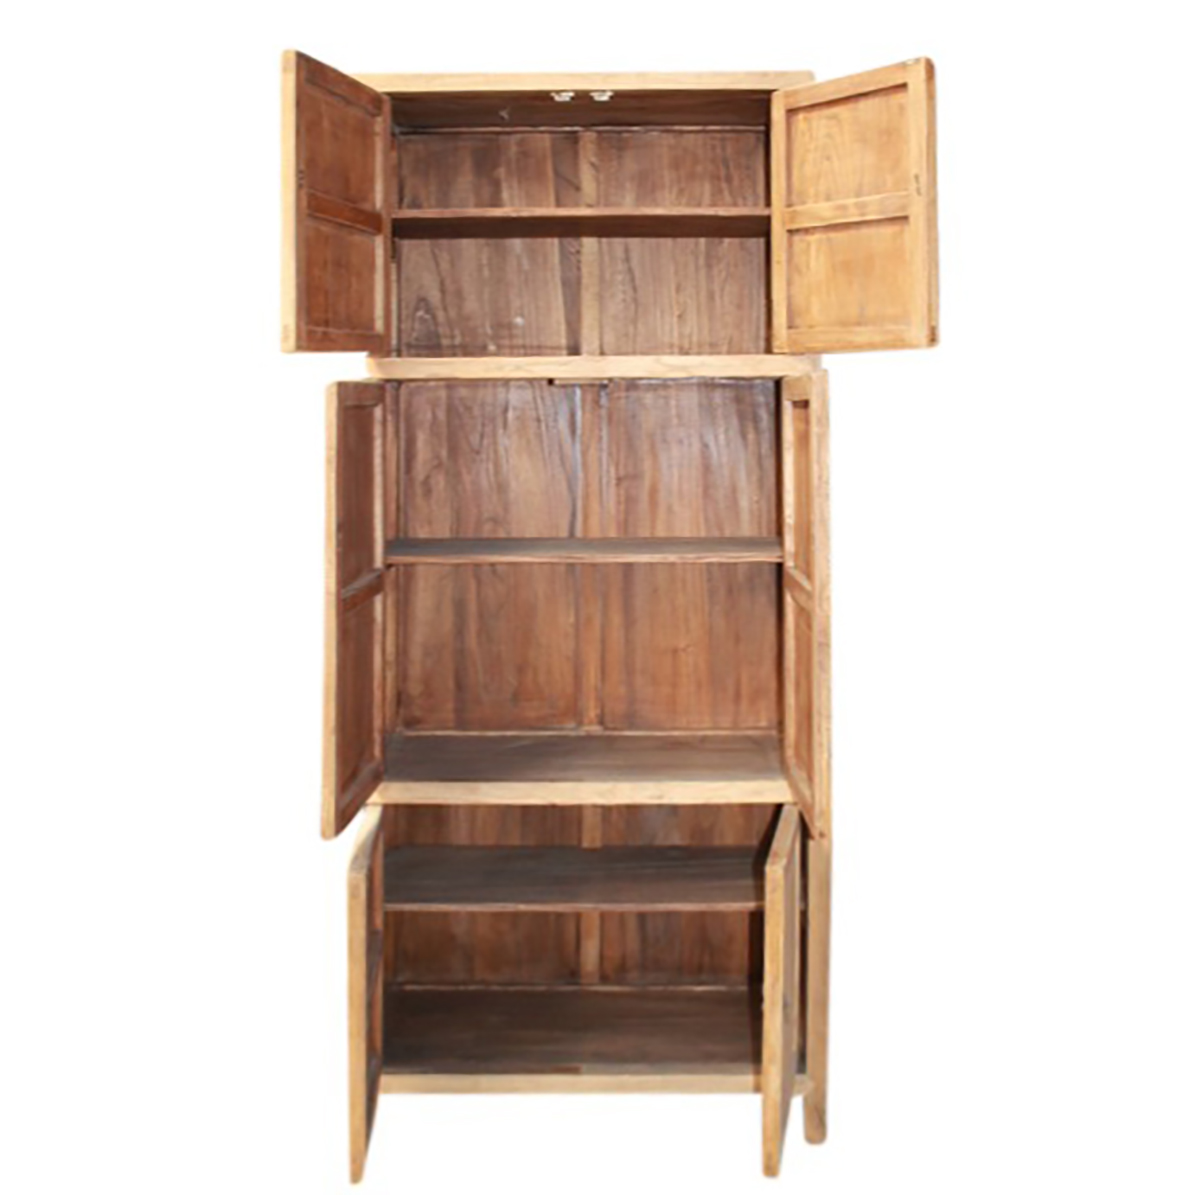 COMPEN HIGH CABINET 2